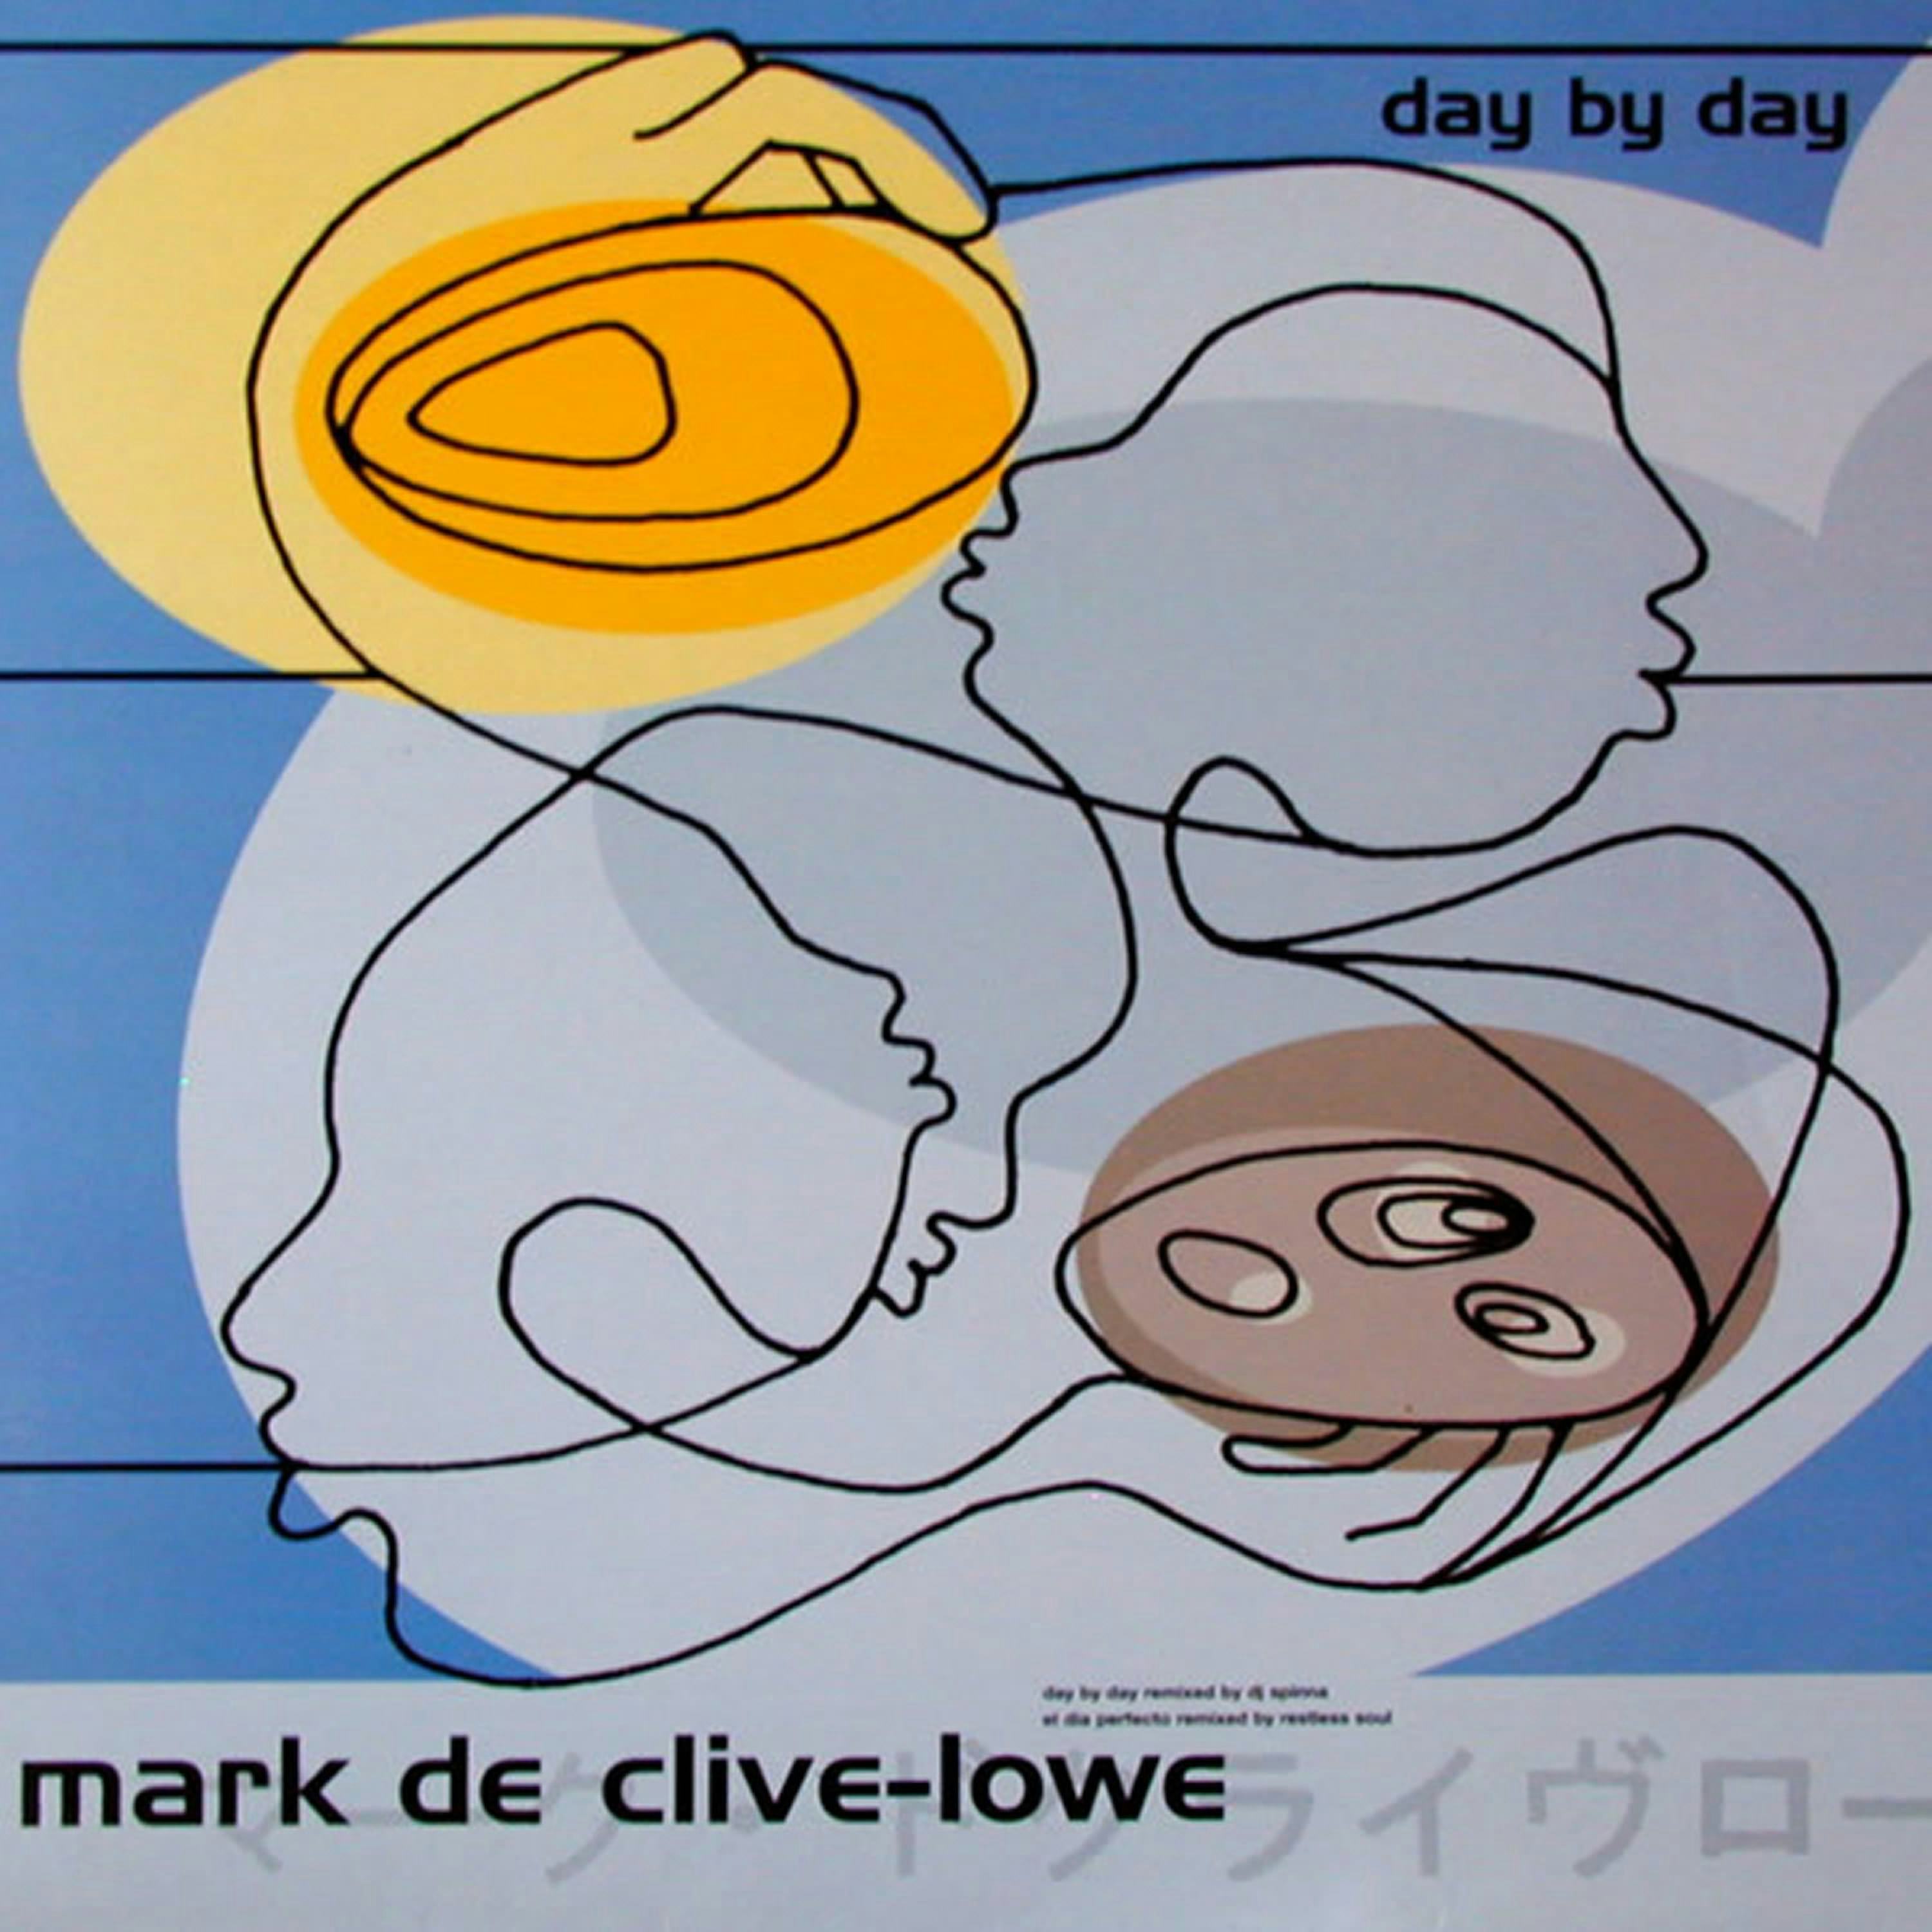 Cover art for Day By Day (DJ Spinna remix) by Mark de Clive-Lowe